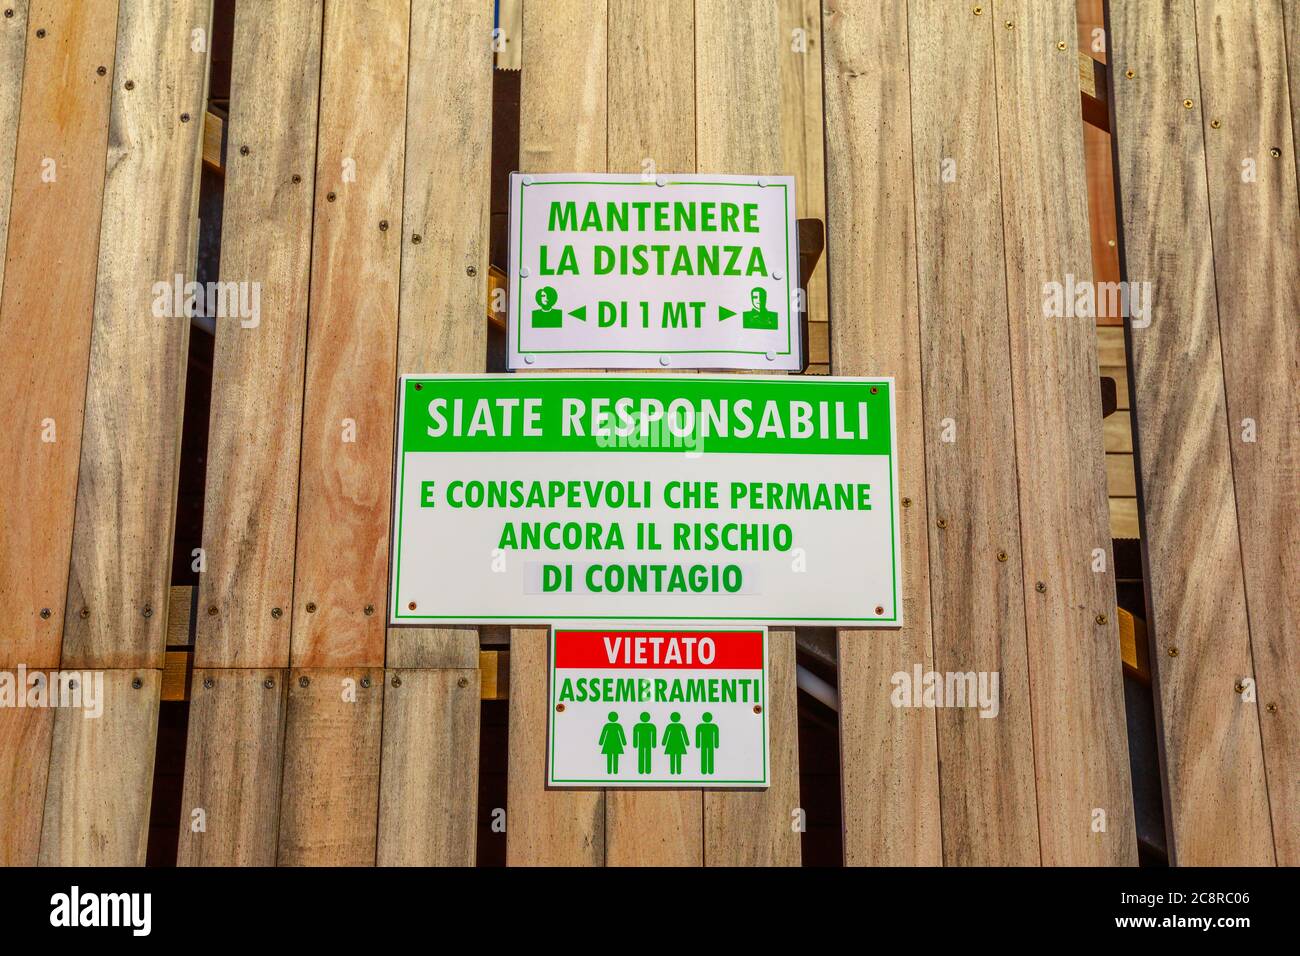 Sansone Beach, Elba island, Italy - June 17, 2020: alert security sign with social distancing rules in a pub of Sansone Beach in Elba Island. summer Stock Photo